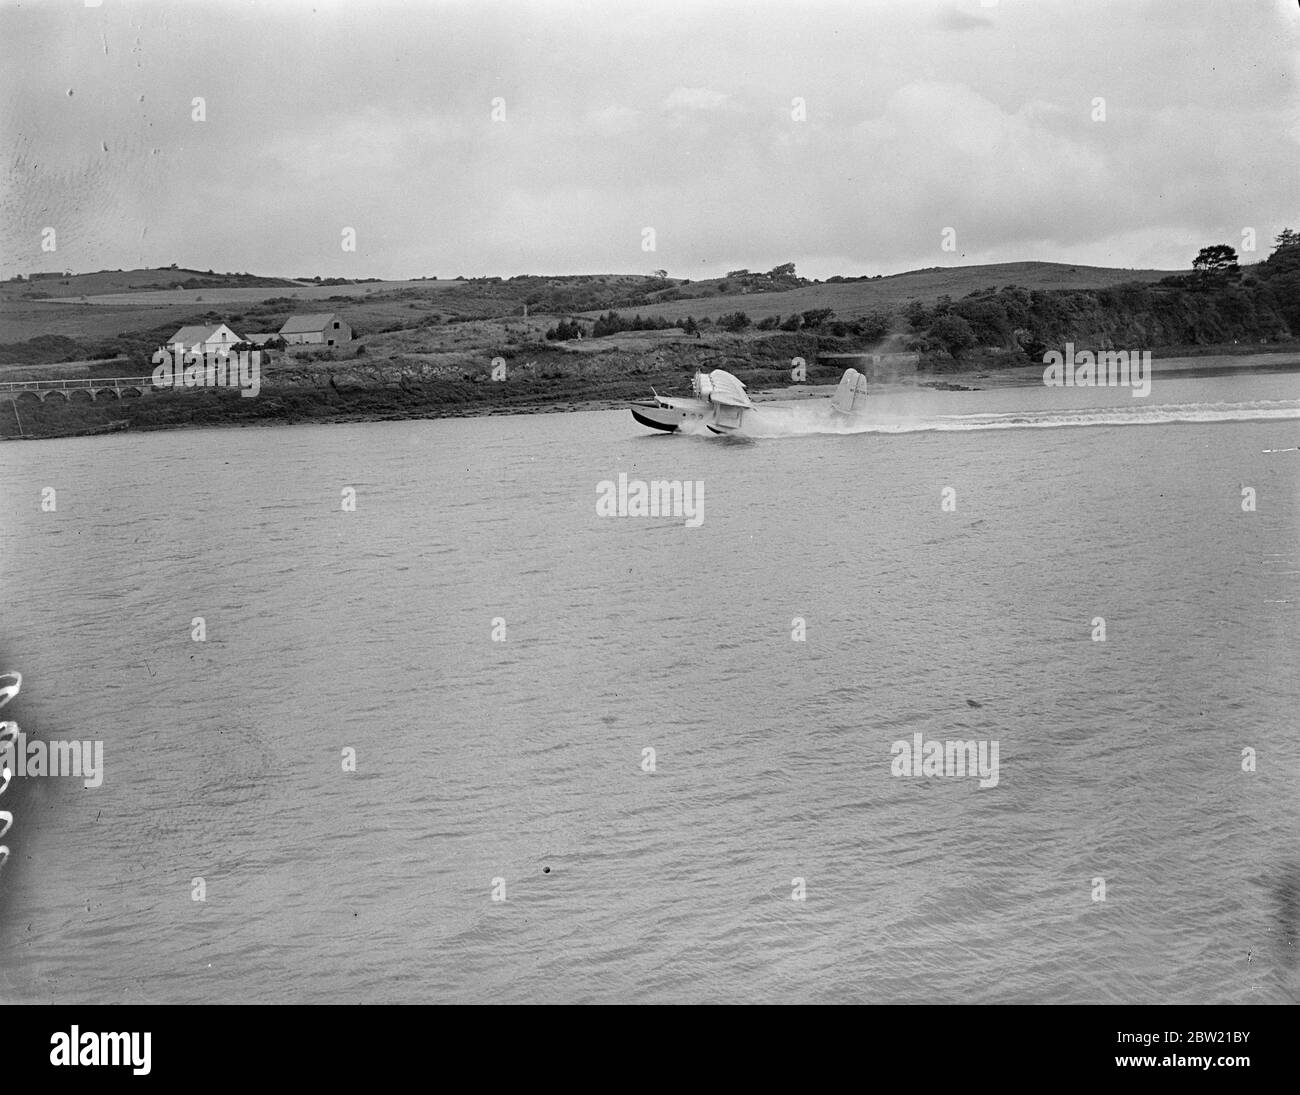 The Clipper landing on sea. Comander, Captain Harold E Gray and members of they crew of the clipper. as it landed at Foynes air base after a historic flight in 12 hours and 40 minutes. In which the British flying boat inaugurated the transatlantic 's experimental service. 6 July 1937 Stock Photo